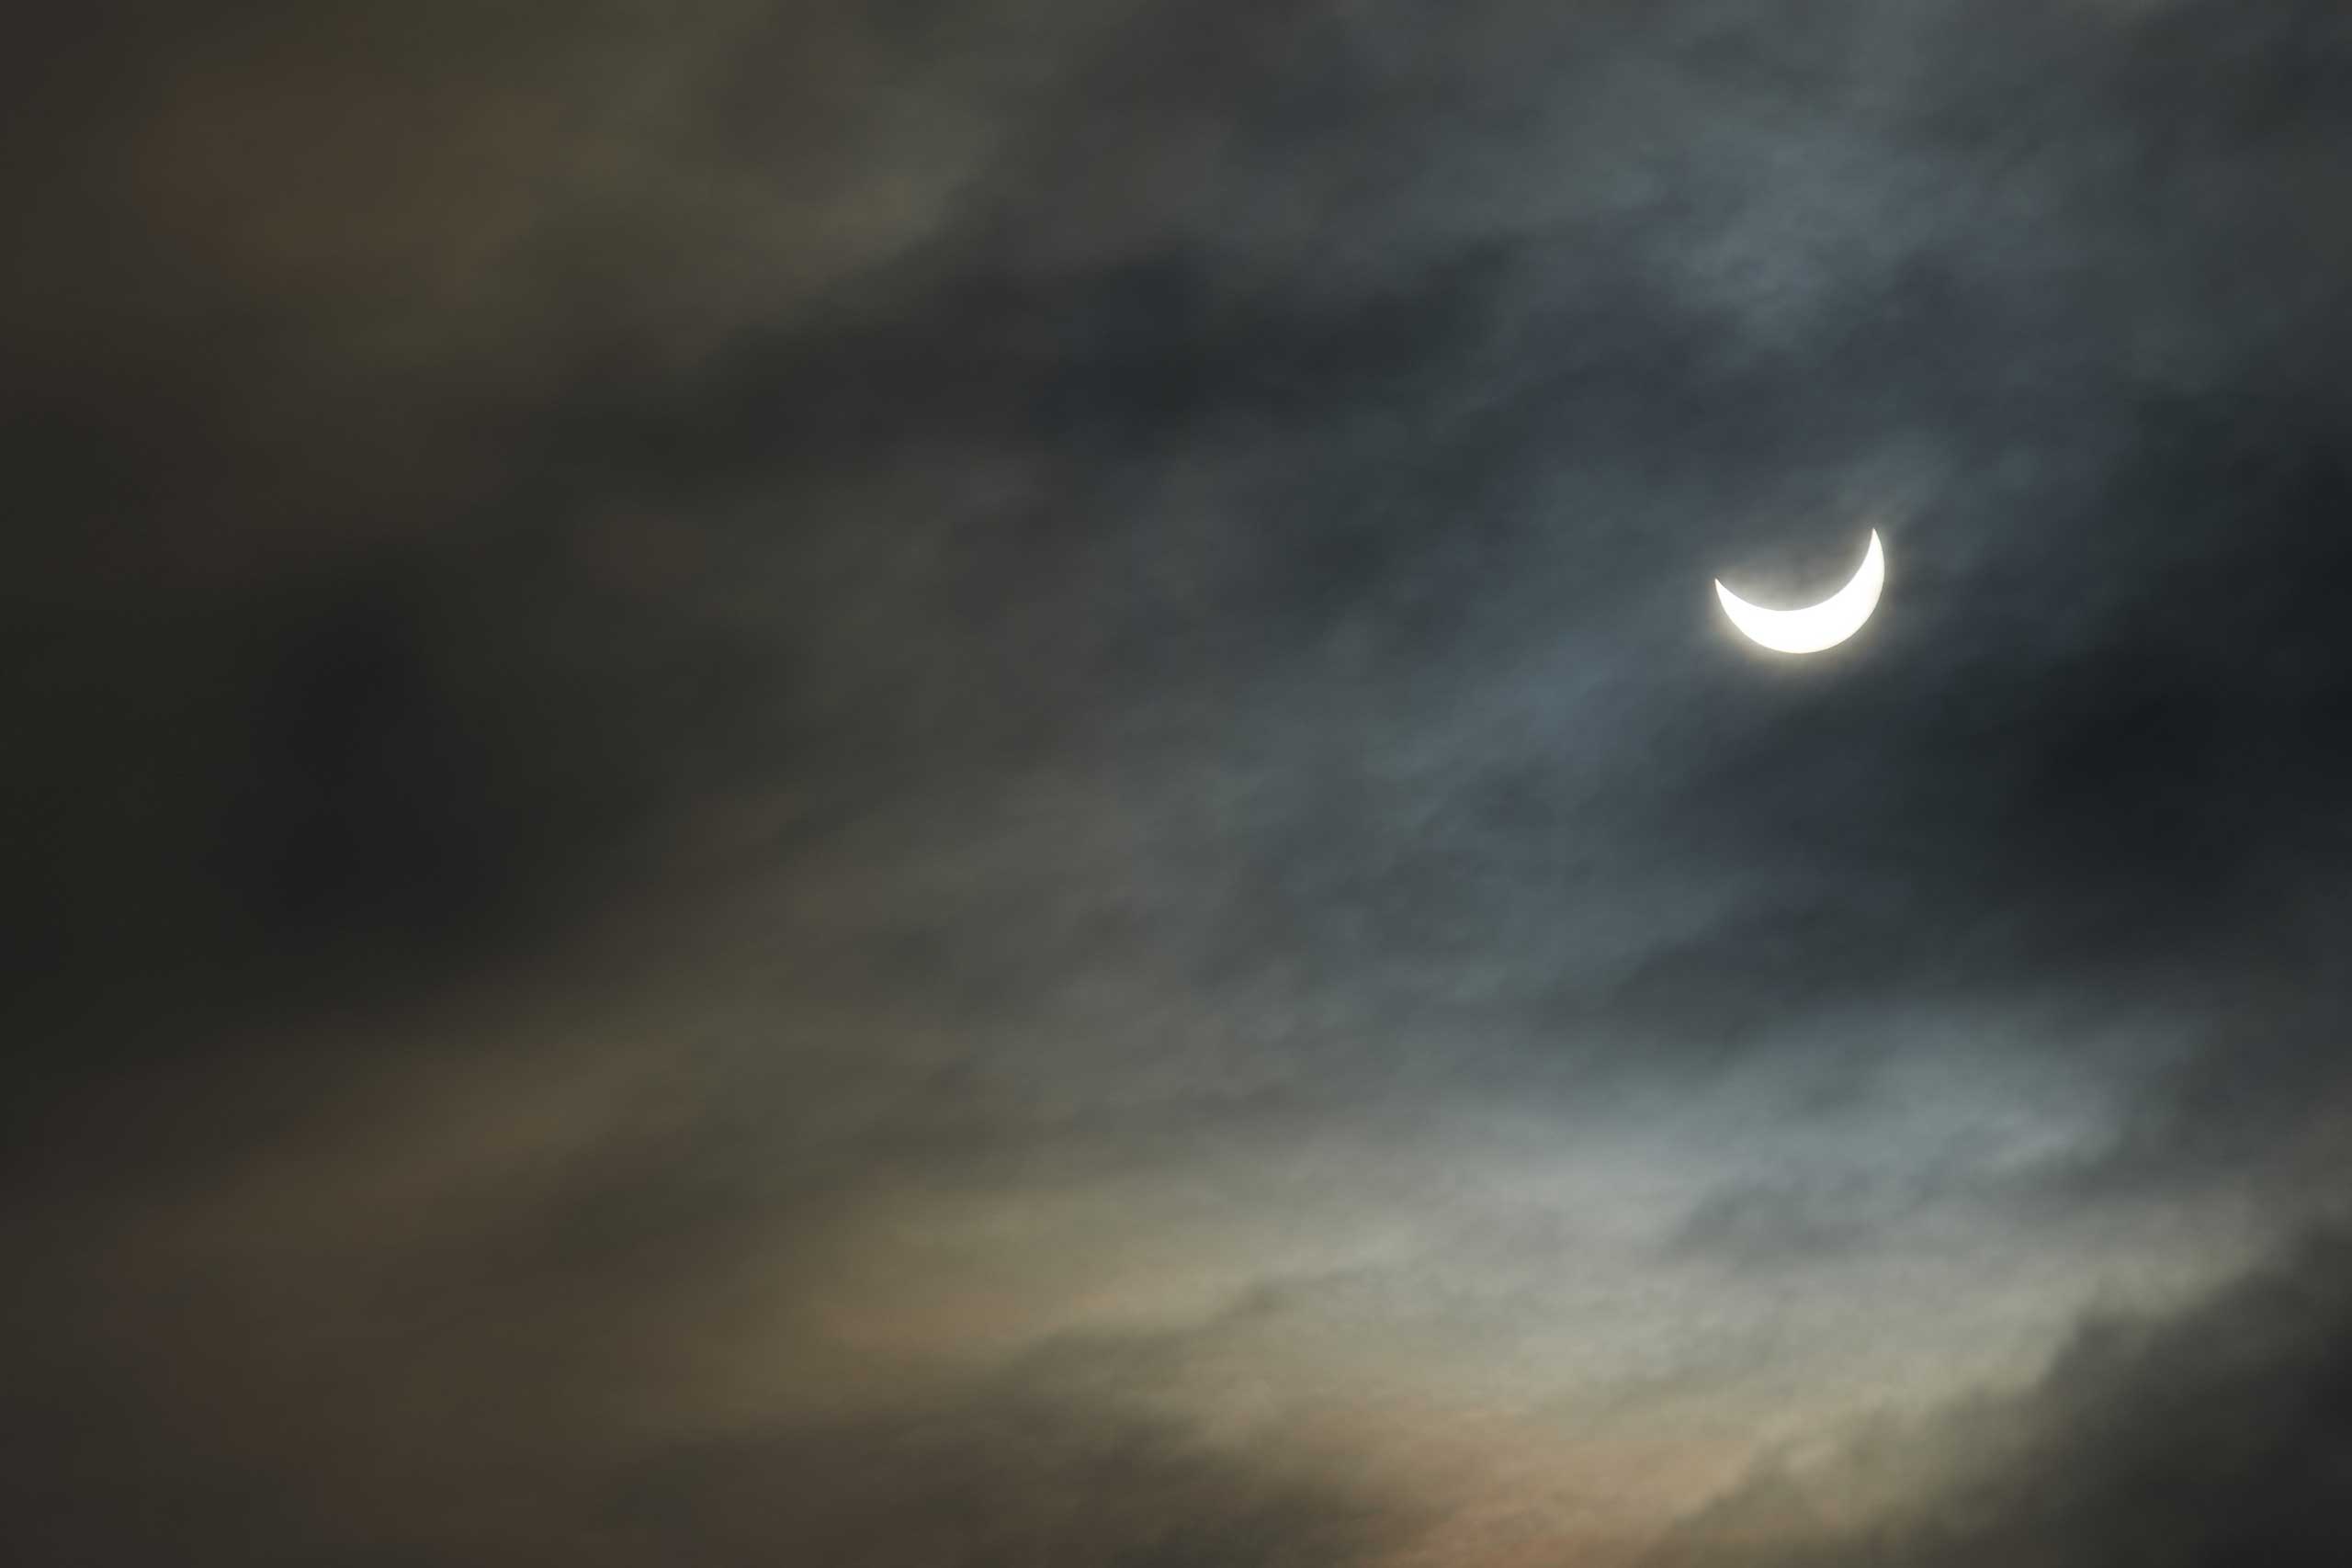 The sun through clouds during the maximun solar eclipse seen from the Jolimont observatory in Toulouse, France on March 20, 2015.